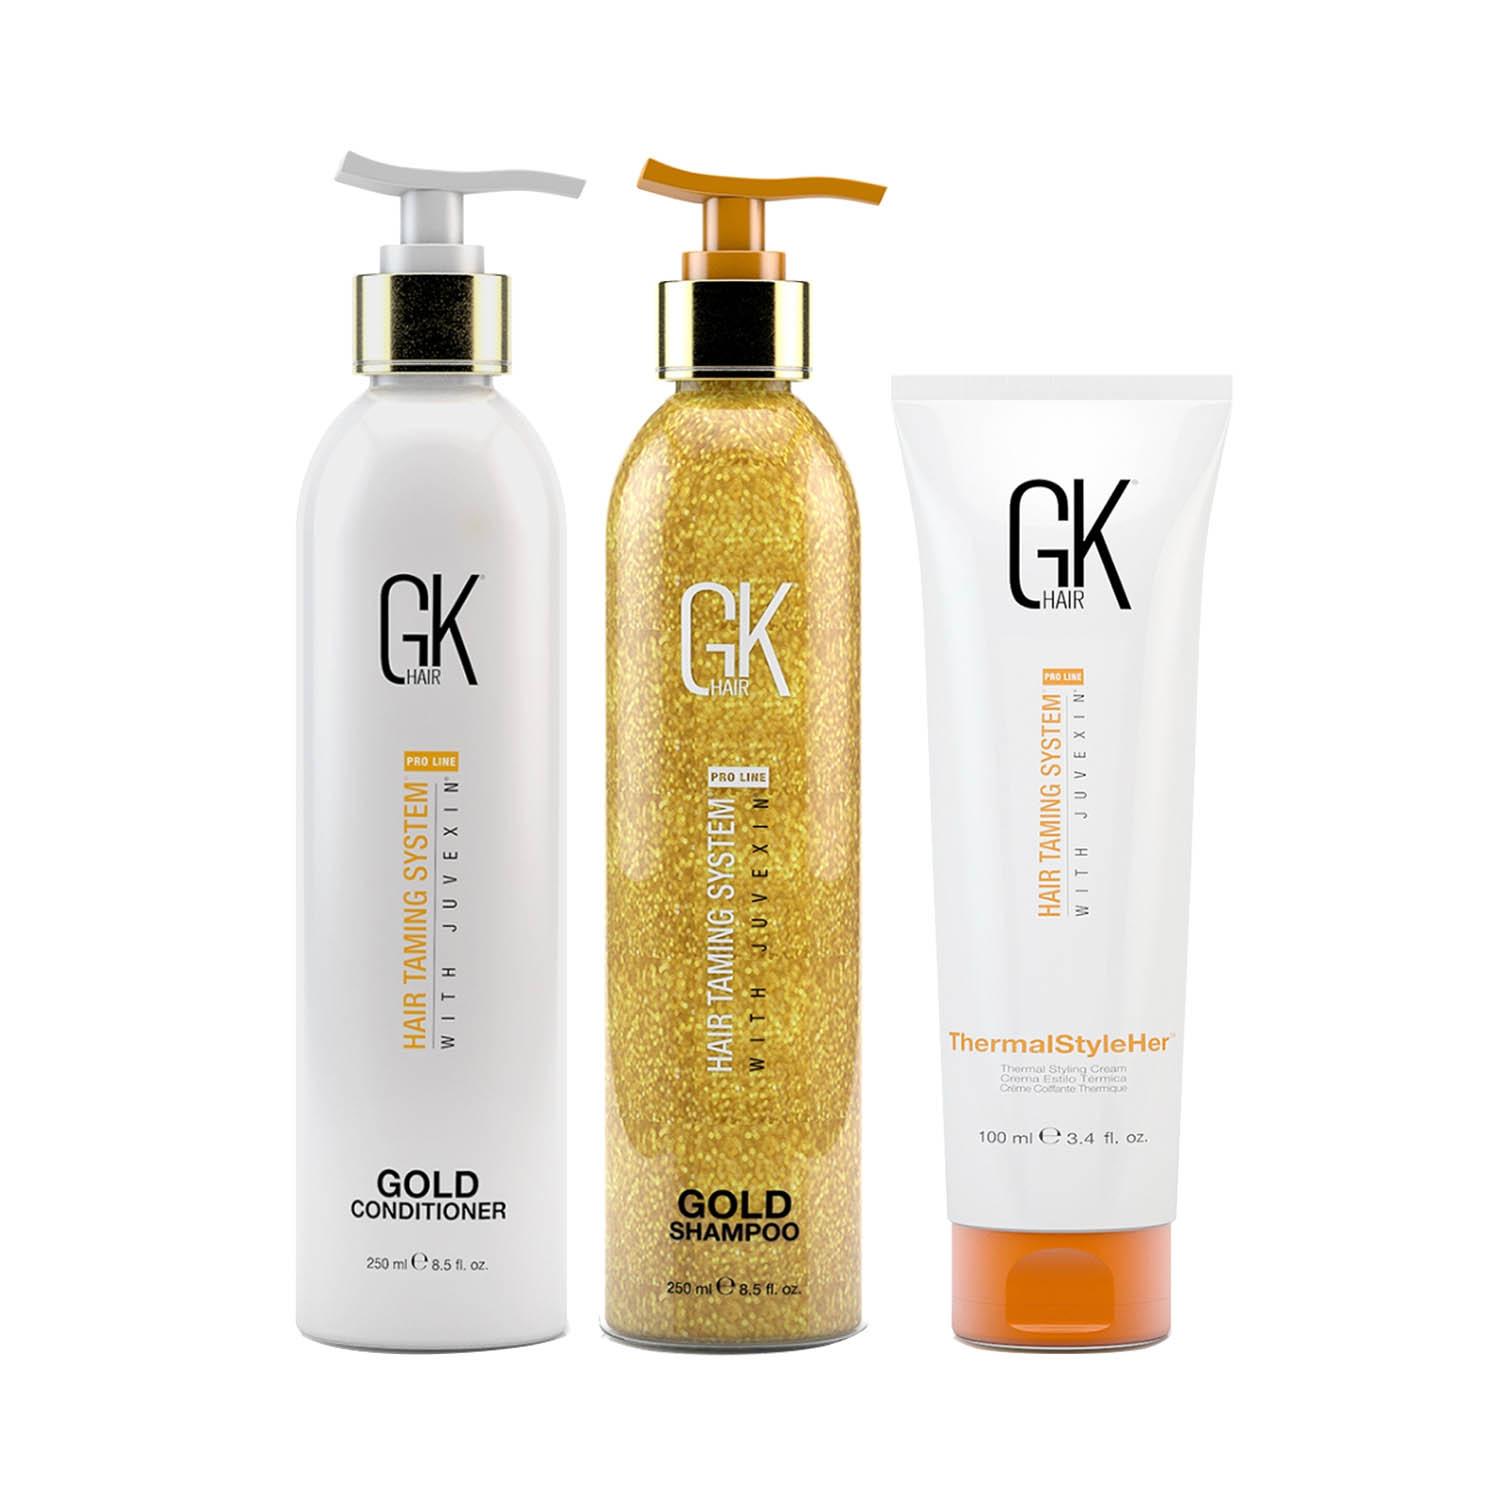 GK Hair | GK Hair Gold Shampoo and Conditioner 250ml with Thermal styler Cream 100ml